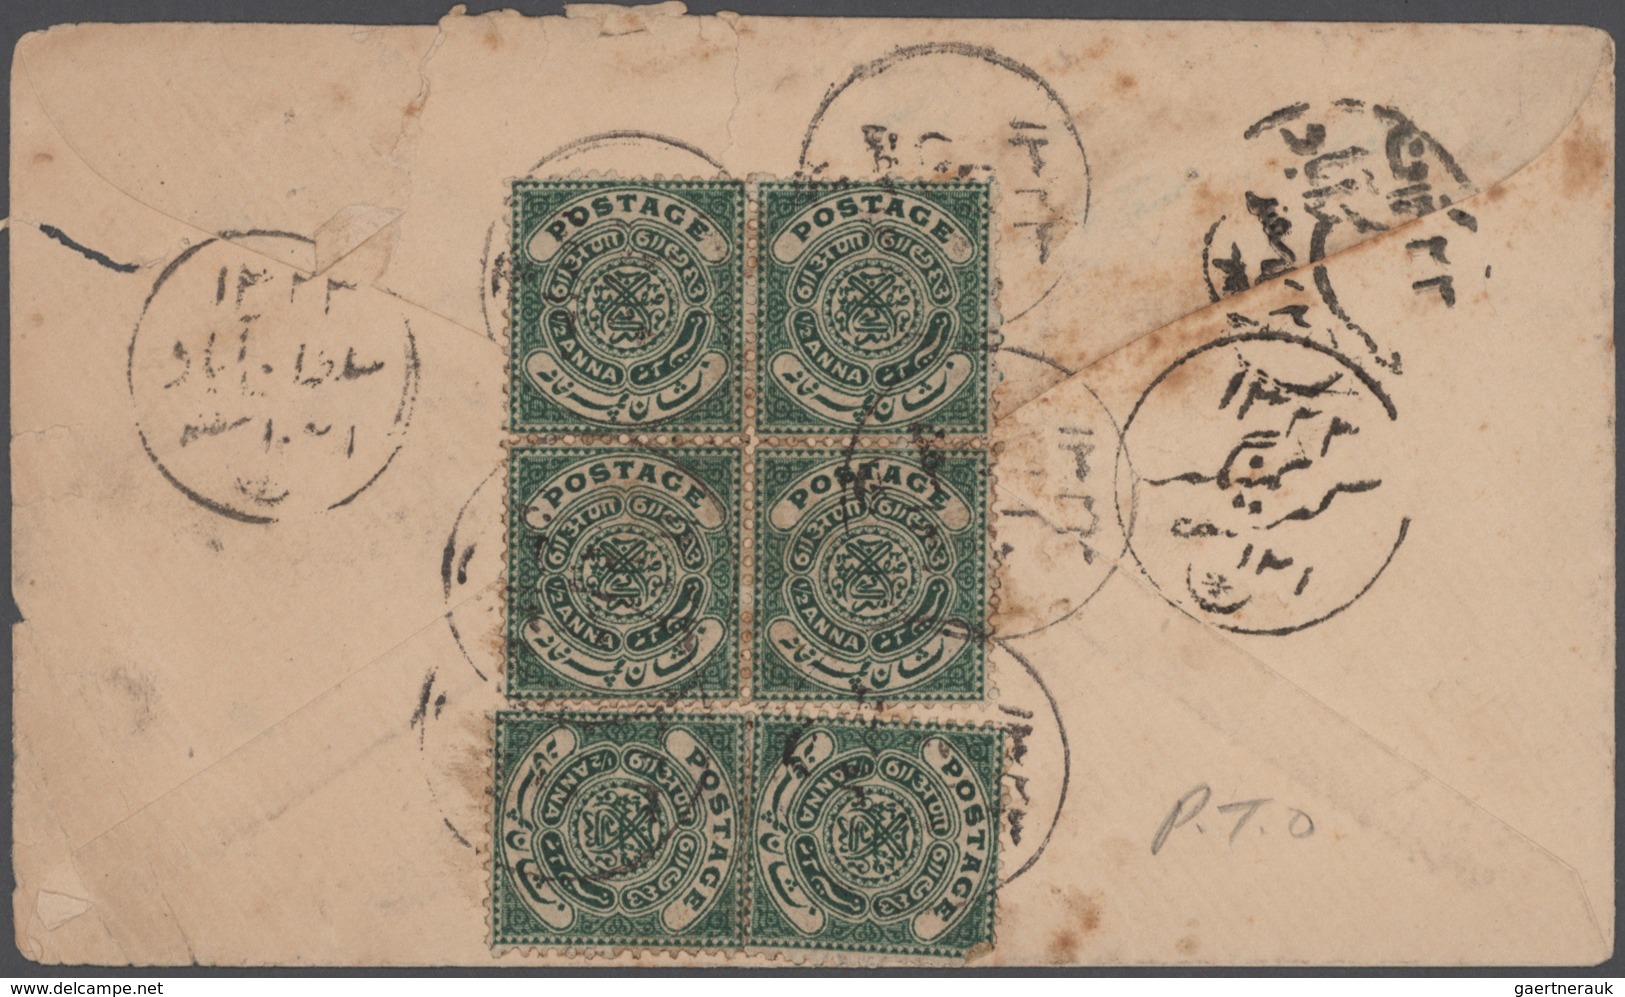 Indien - Feudalstaaten: 1850/1947 (ca.), interesting postal history collection of the Indian Feudato